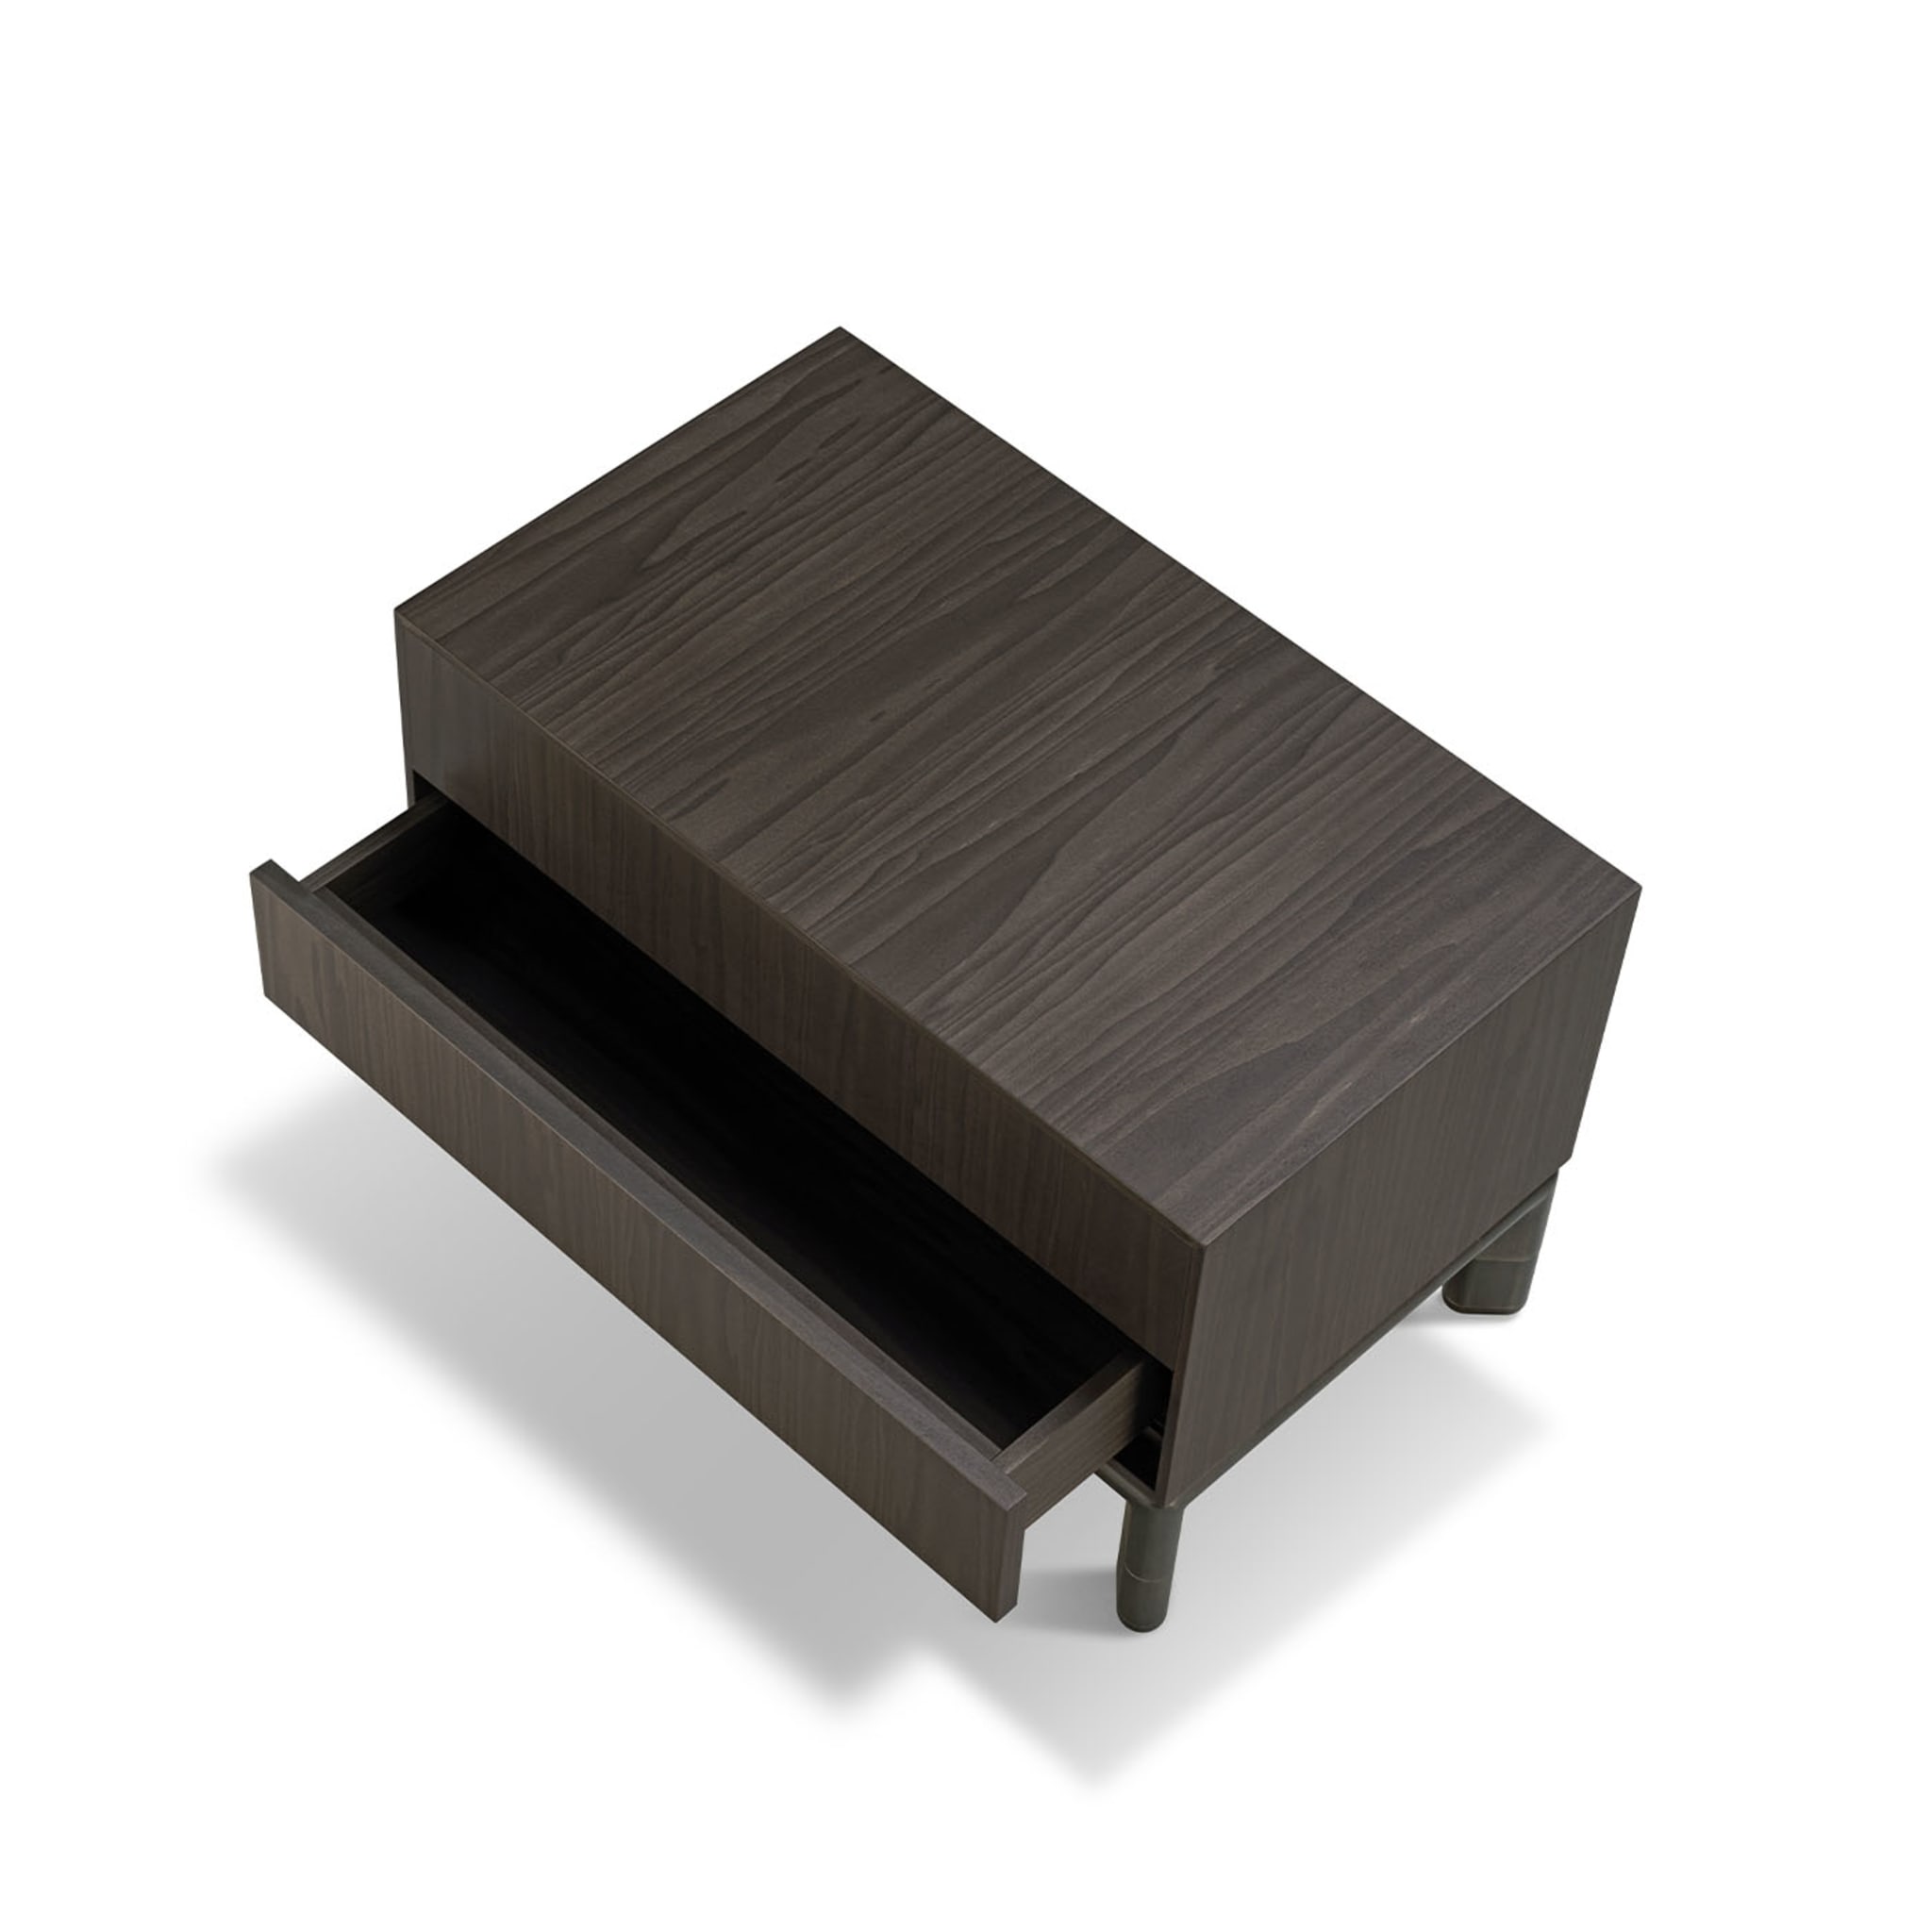 Frame Bedside Table by Stefano Giovannoni - Alternative view 2